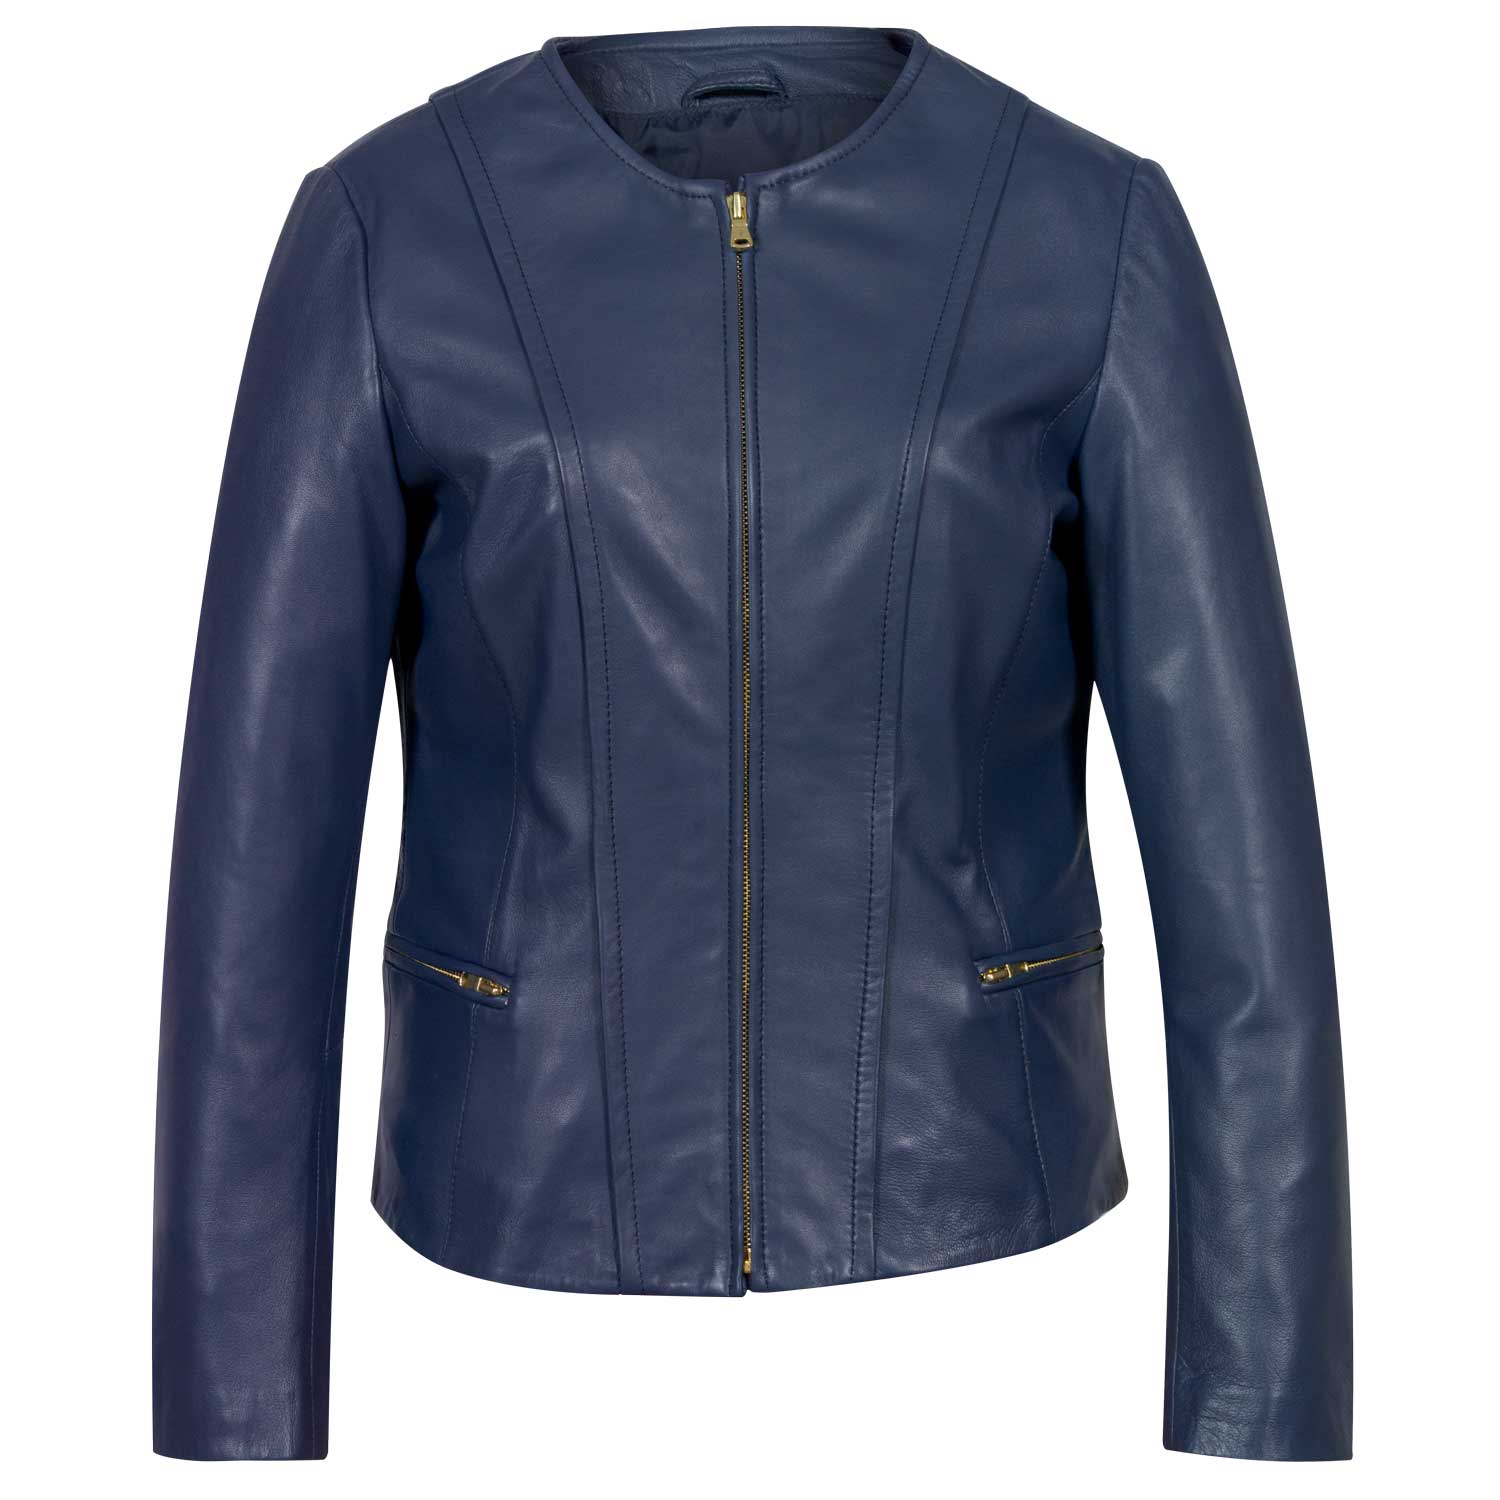 Sophie: Women's Blue Collarless Leather Jacket